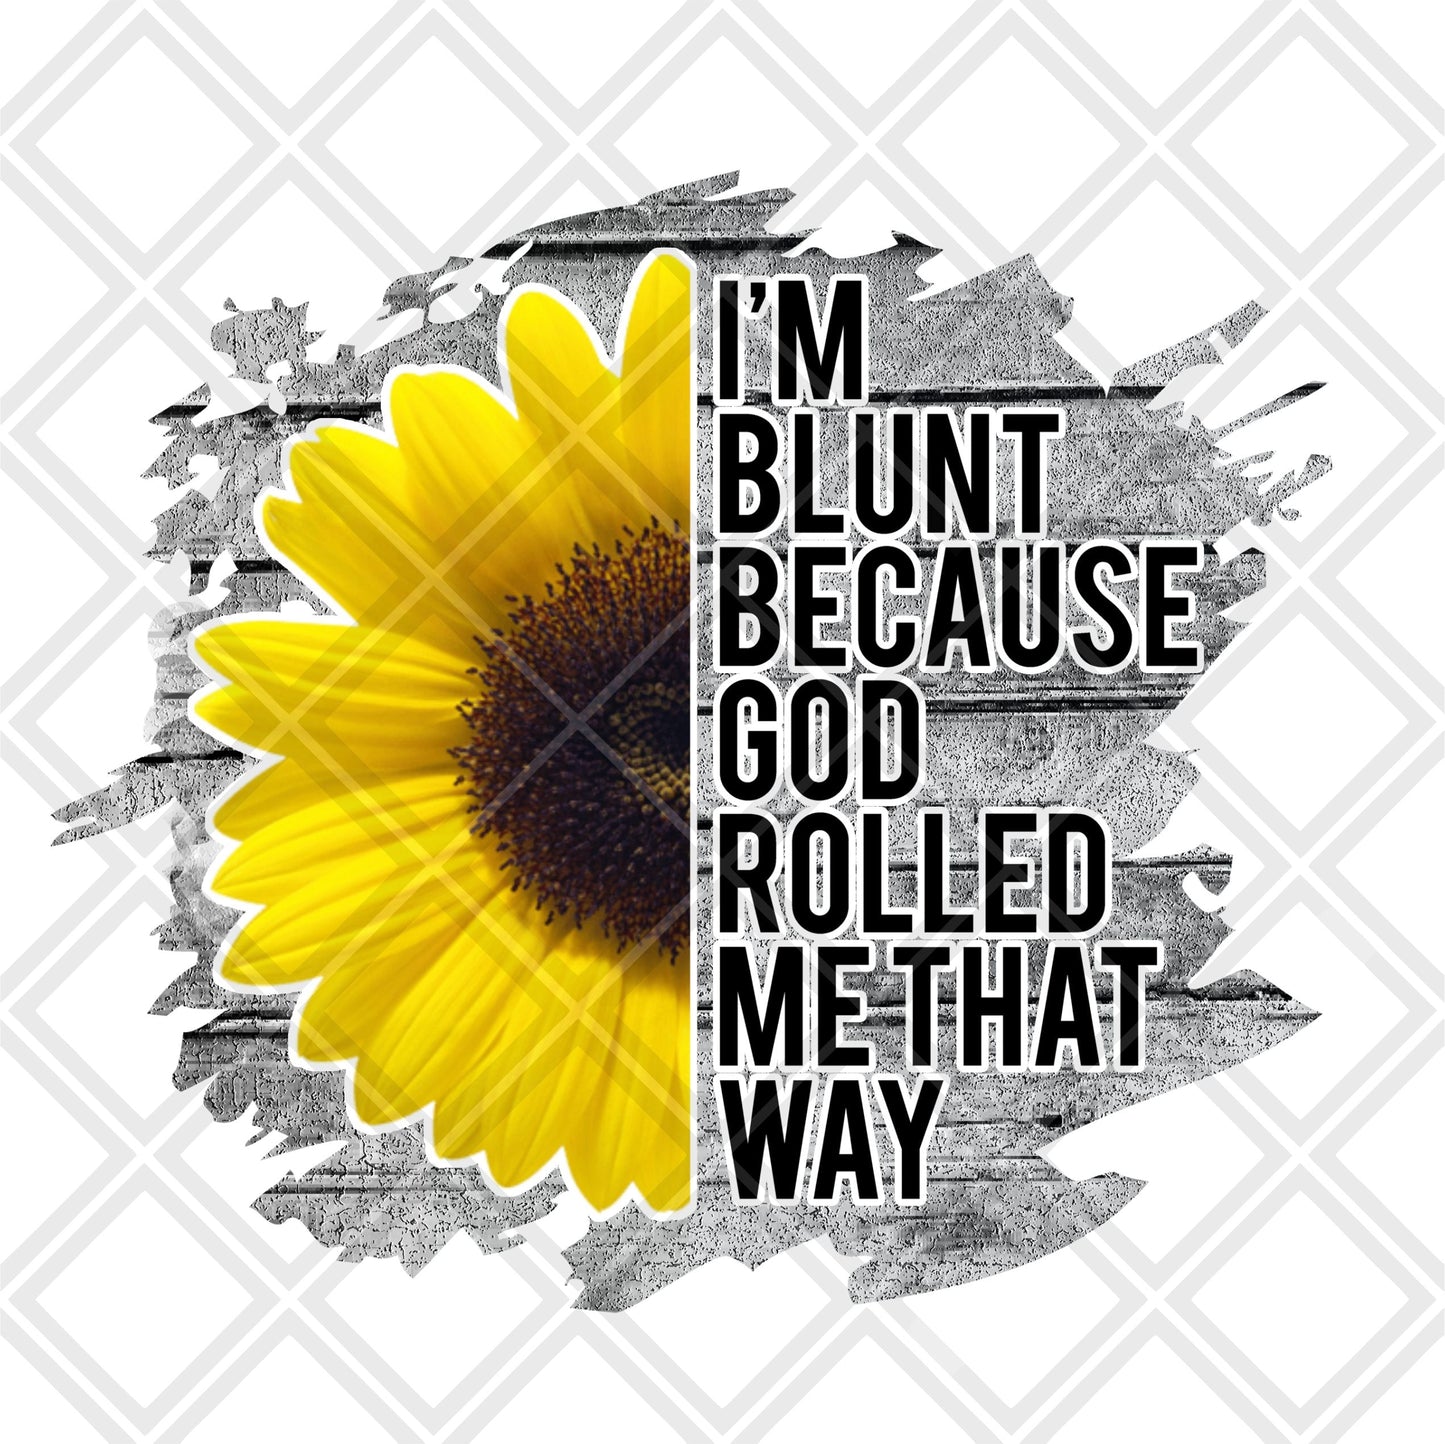 Im Blunt because God rolled me that way sunflower frame DTF TRANSFERPRINT TO ORDER